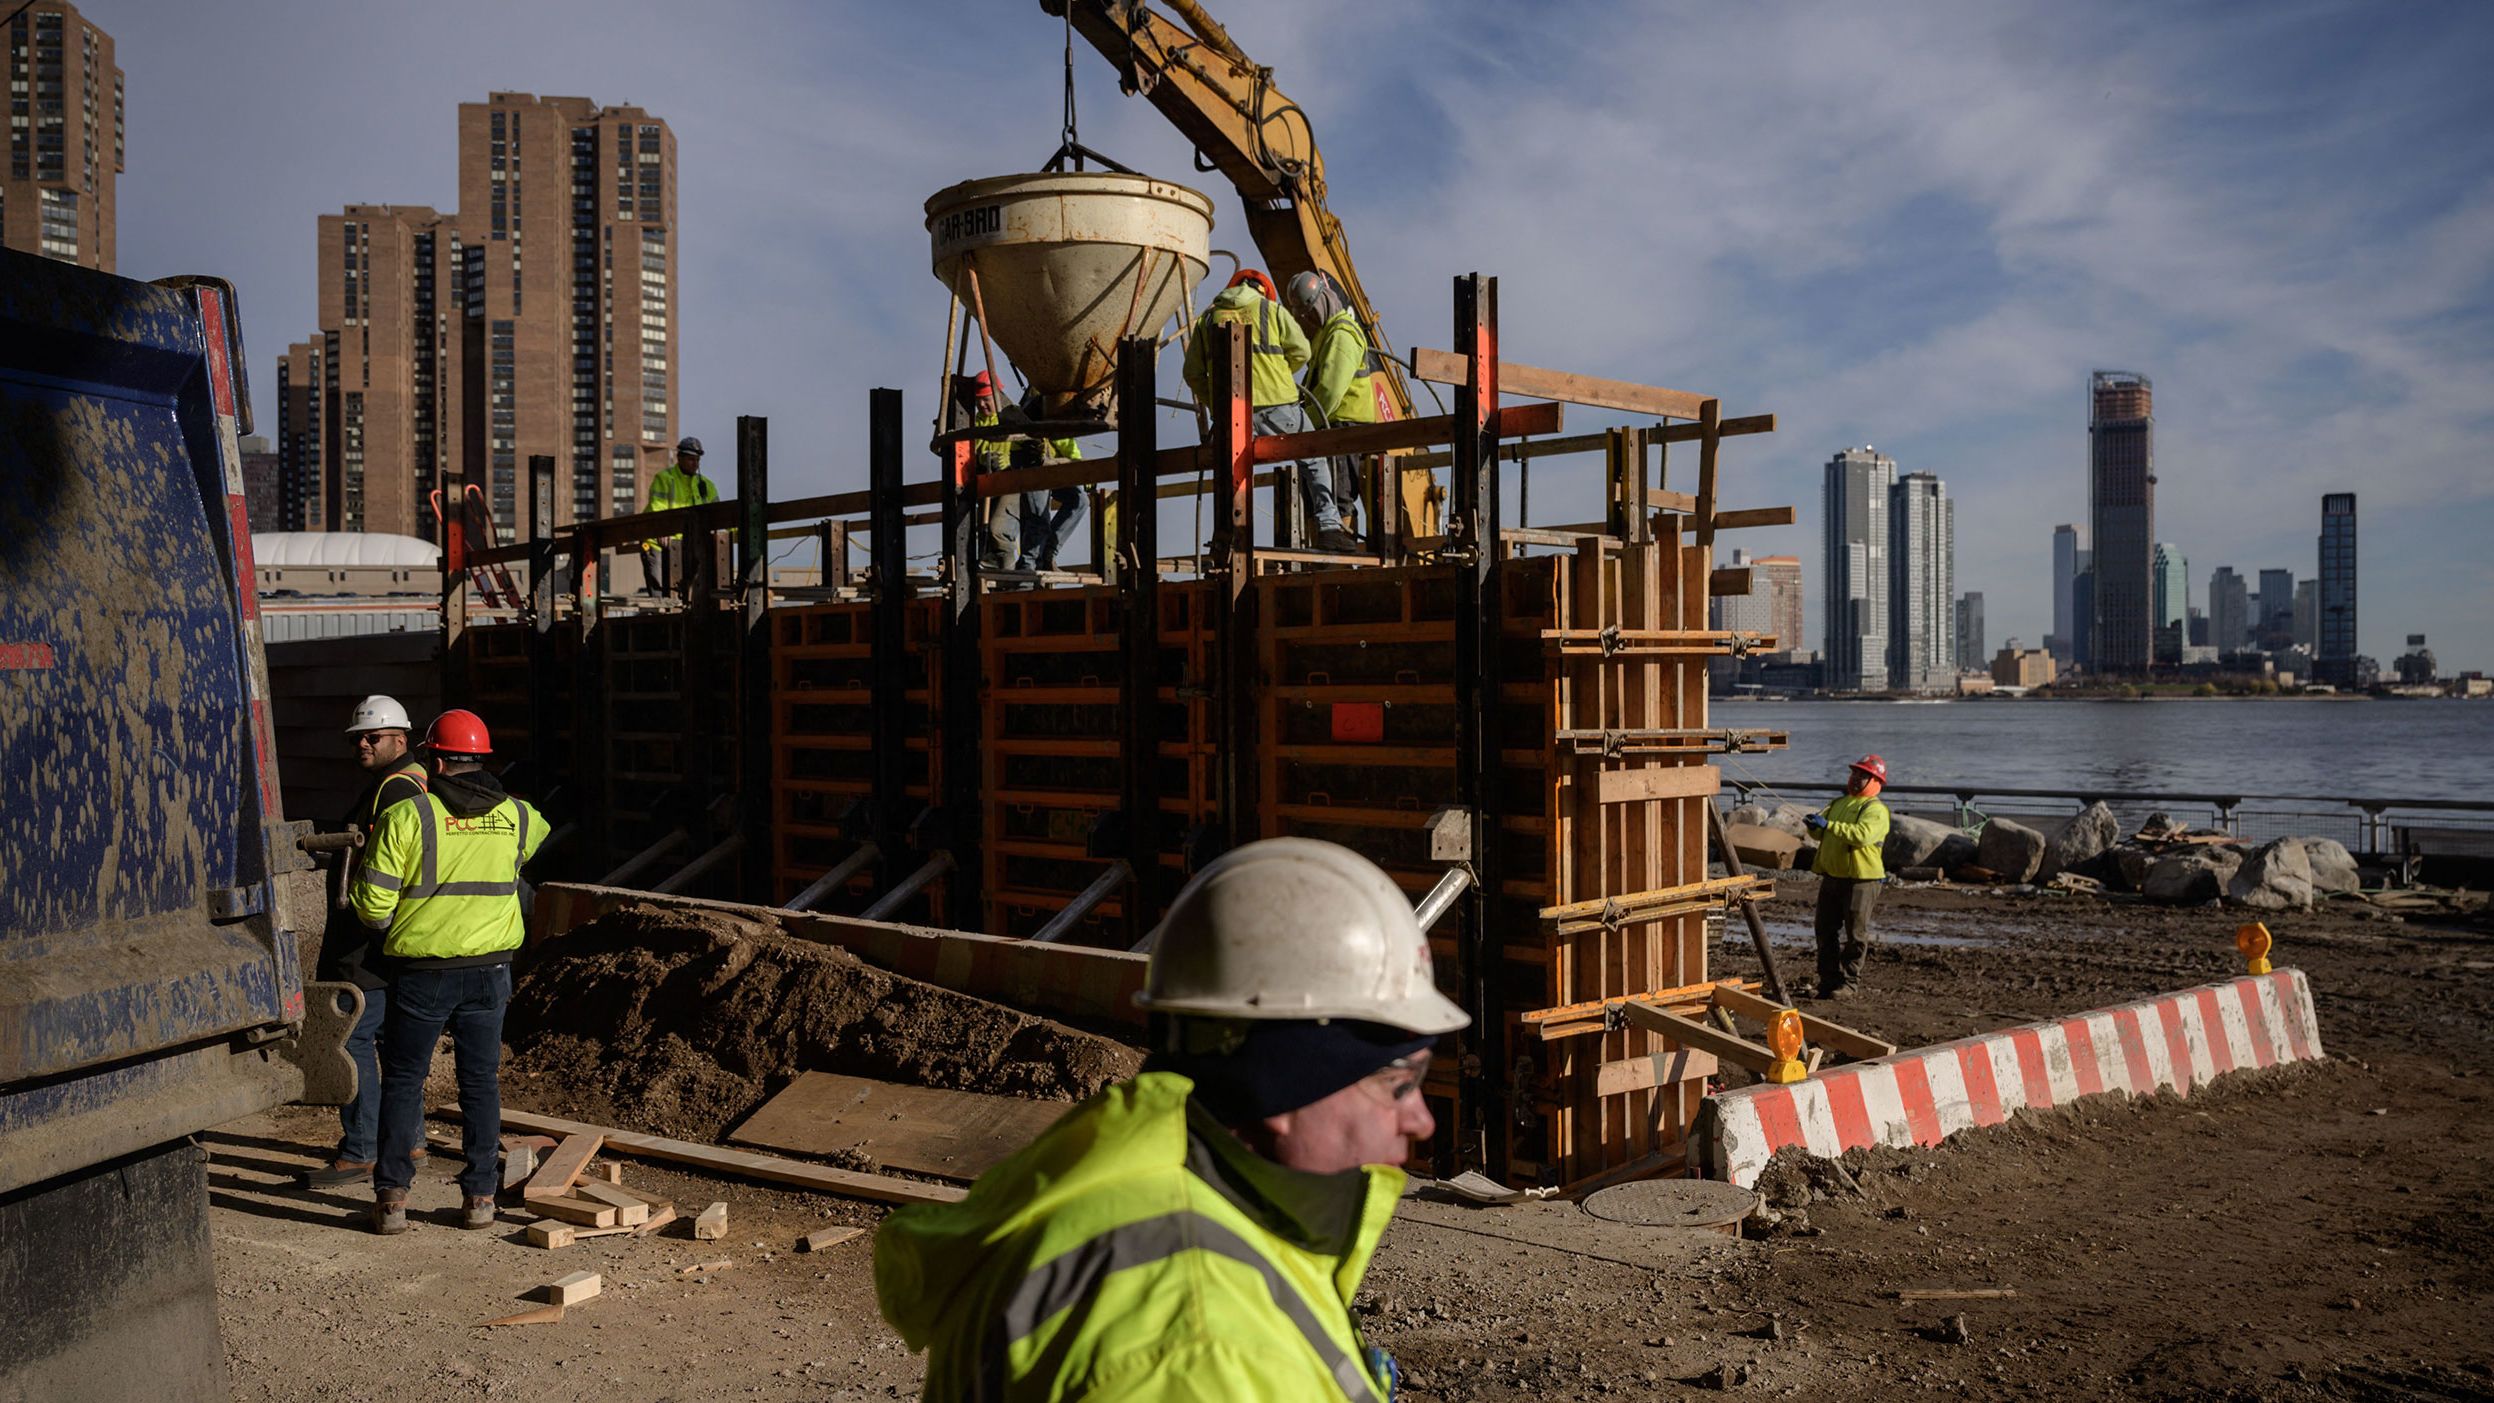 A flood defense wall being constructed on the east side of Manhattan in New York City on December 11, 2021.